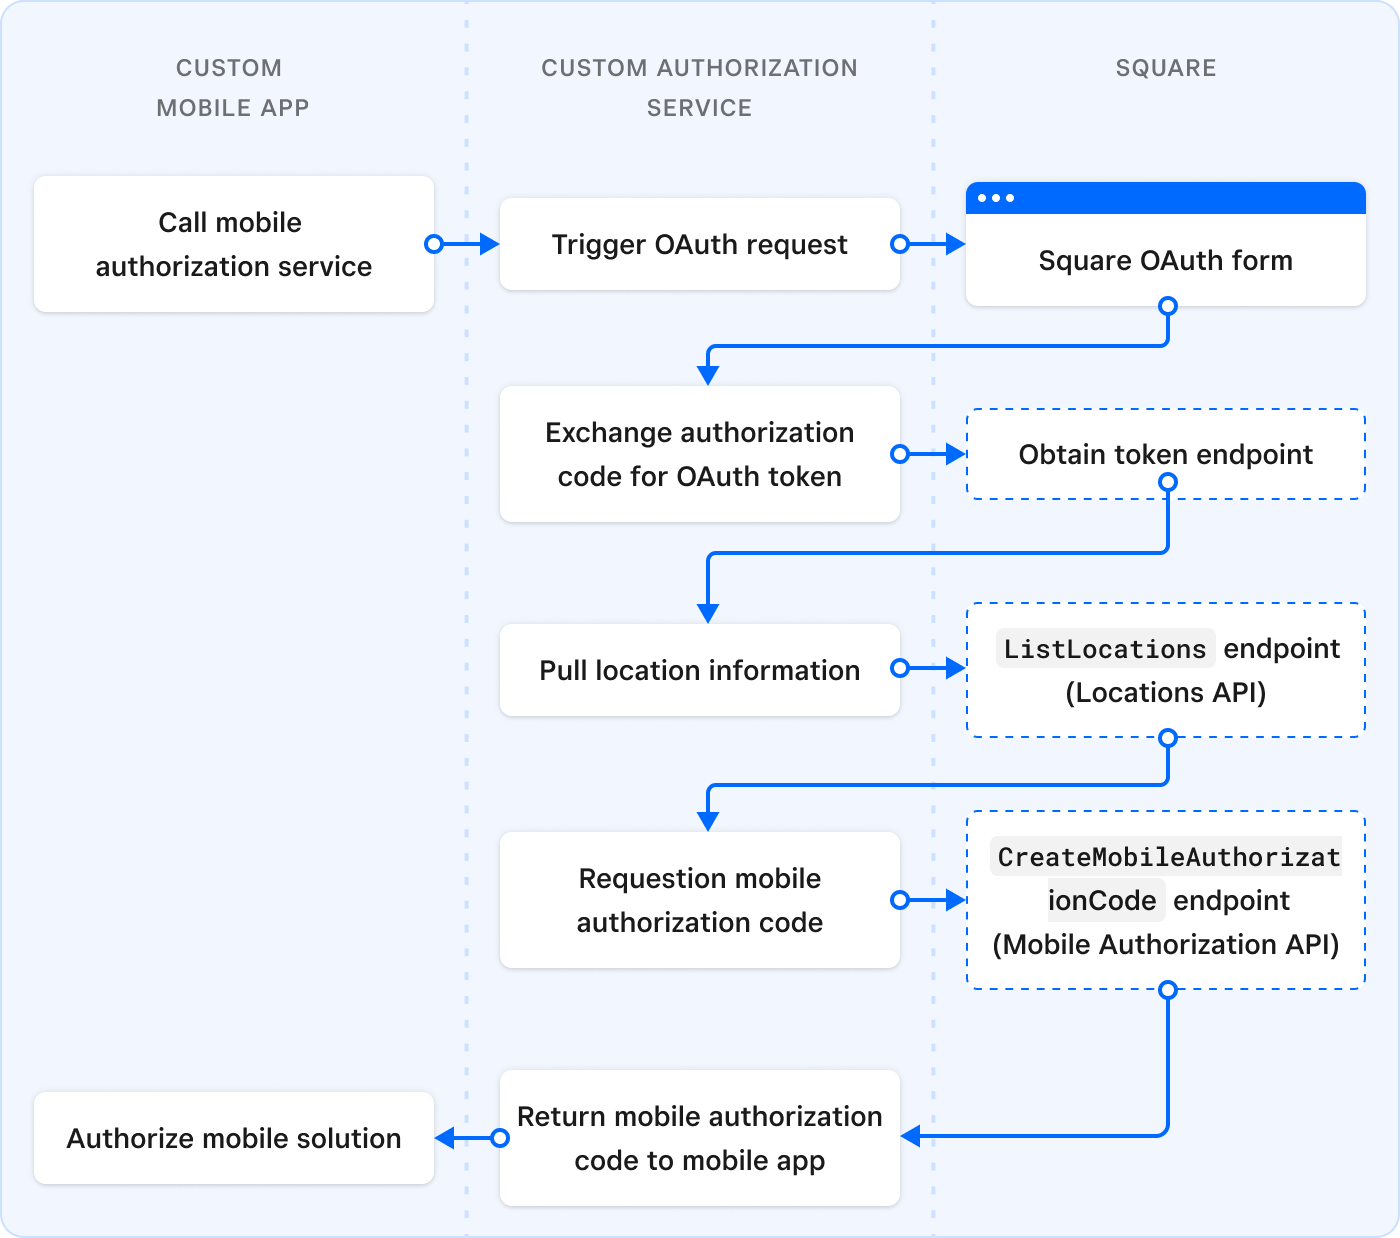 A diagram showing a flowchart of the Mobile Authorization Service process.